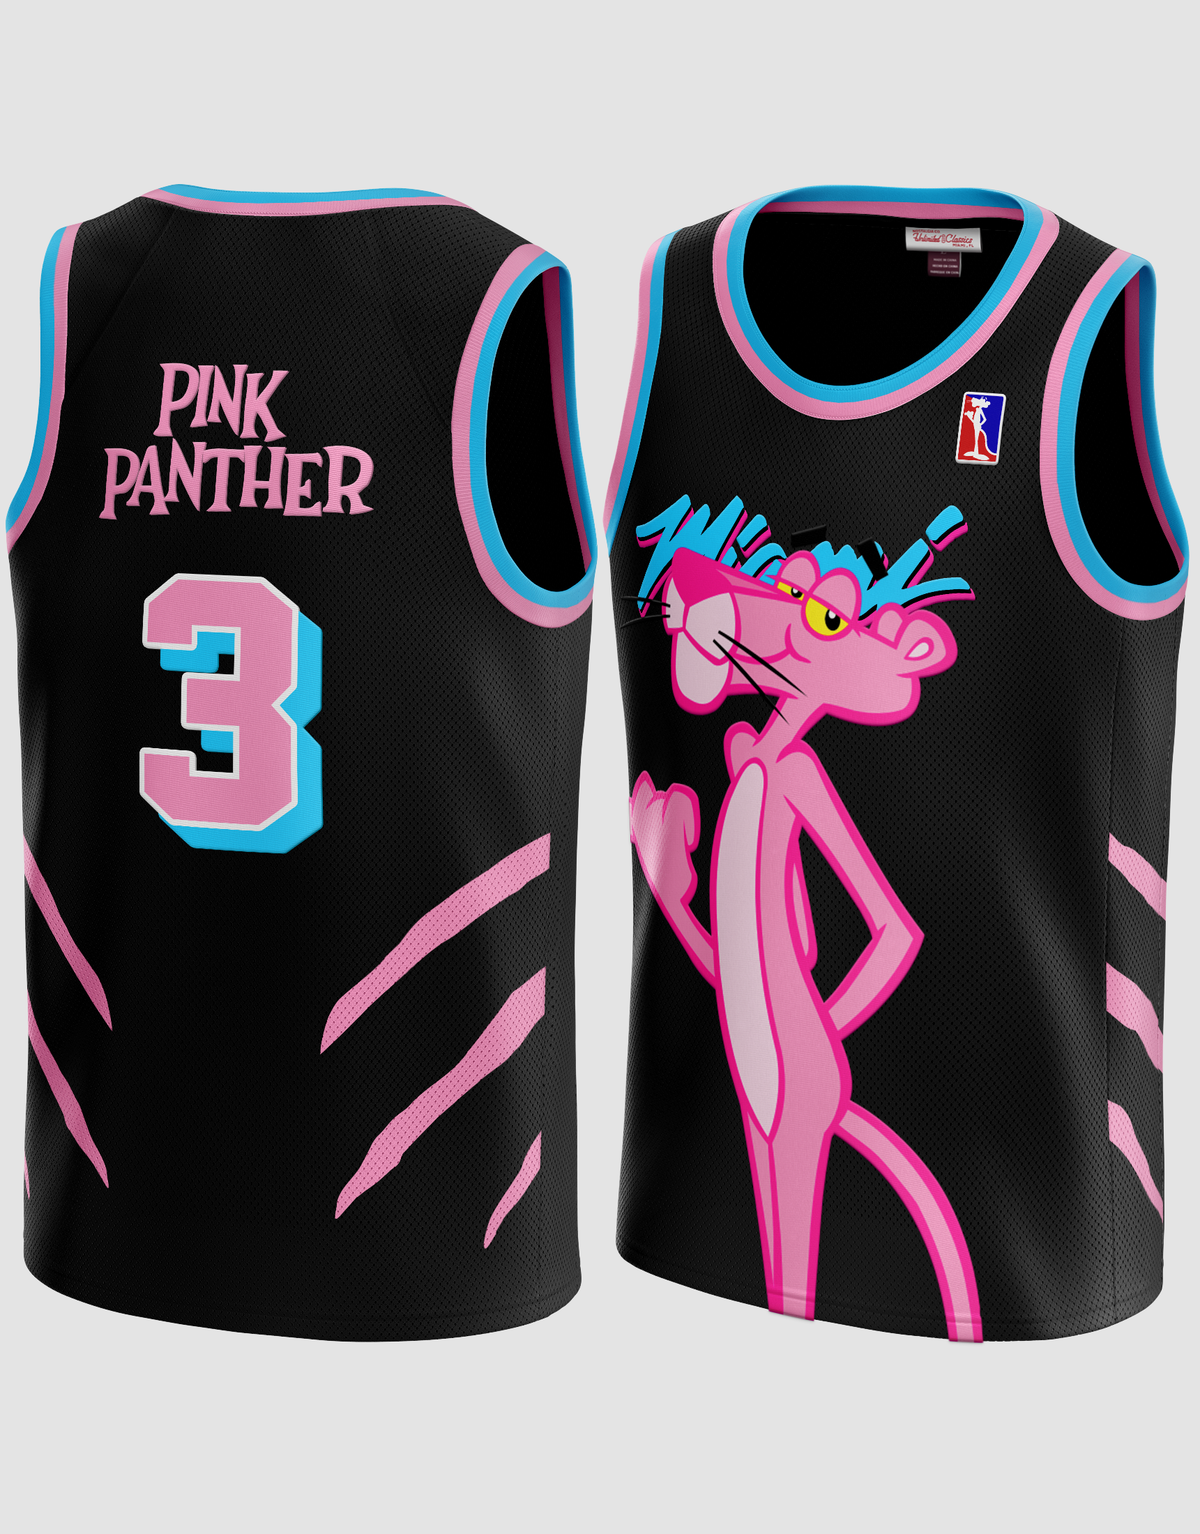 pink panther jersey outfit｜TikTok Search